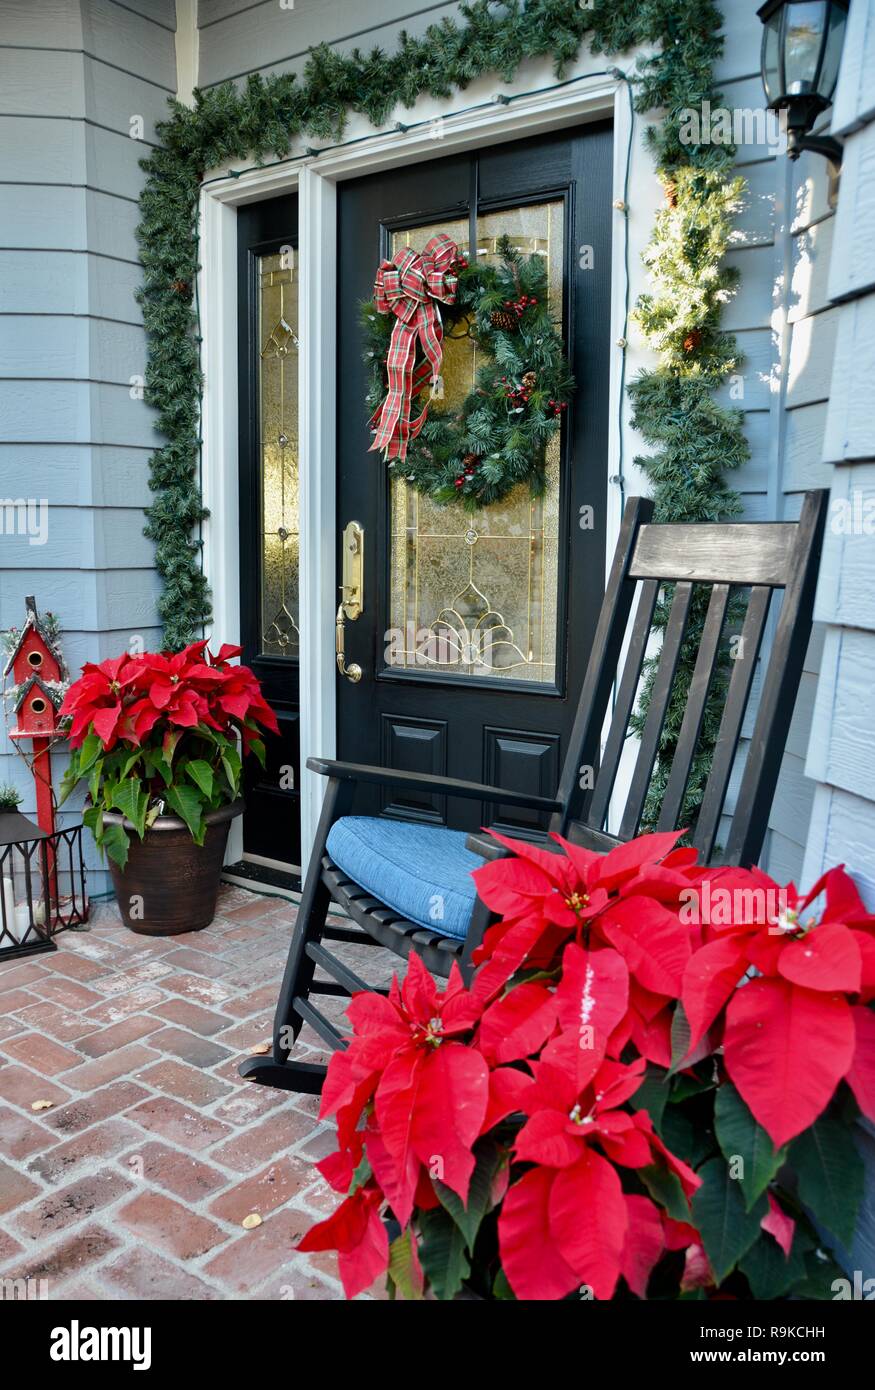 Front door entryway decorated with traditional American Christmas decor: poinsettias, wreath, lanterns, red birdhouse, evergreens and a rocking chair. Stock Photo